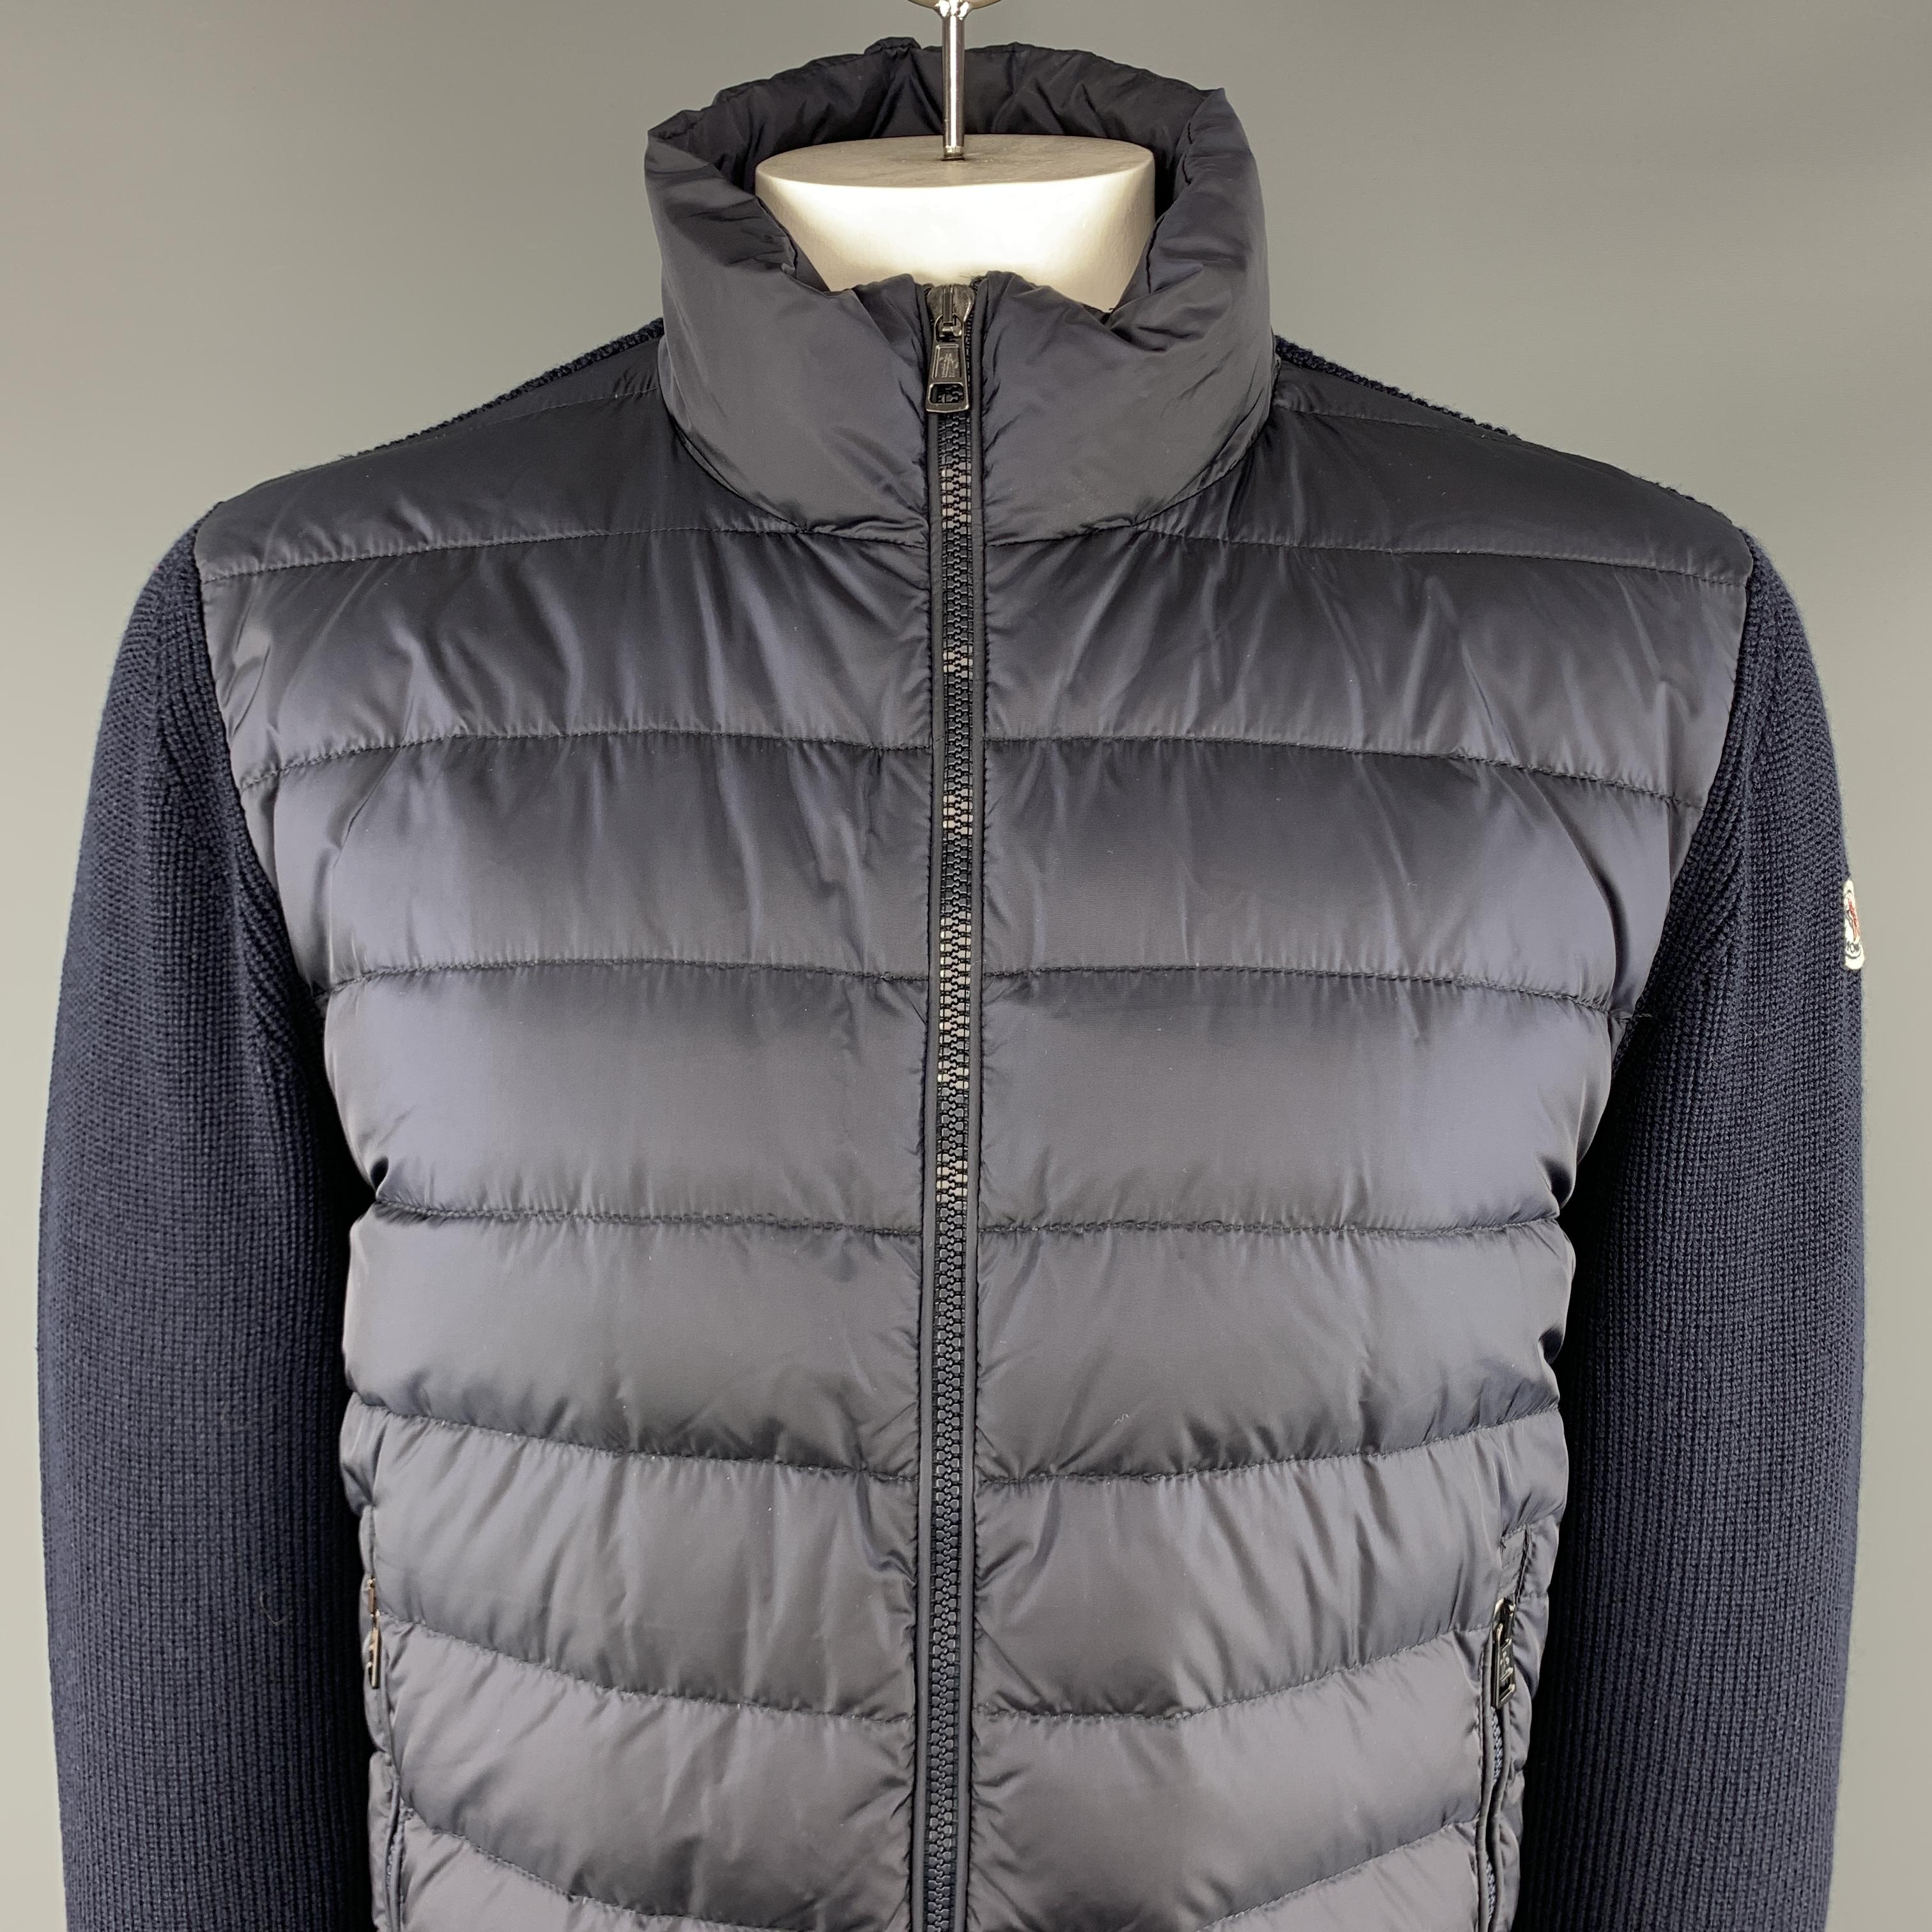 MONCLER Maglione Tricot Jacket comes in navy tones in a knitted acrylic and quilted nylon materials, with a high collar, a full zip. zip pockets and ribbed cuffs and hem. Made in Romania.

Excellent Pre-Owned Condition.
Marked: